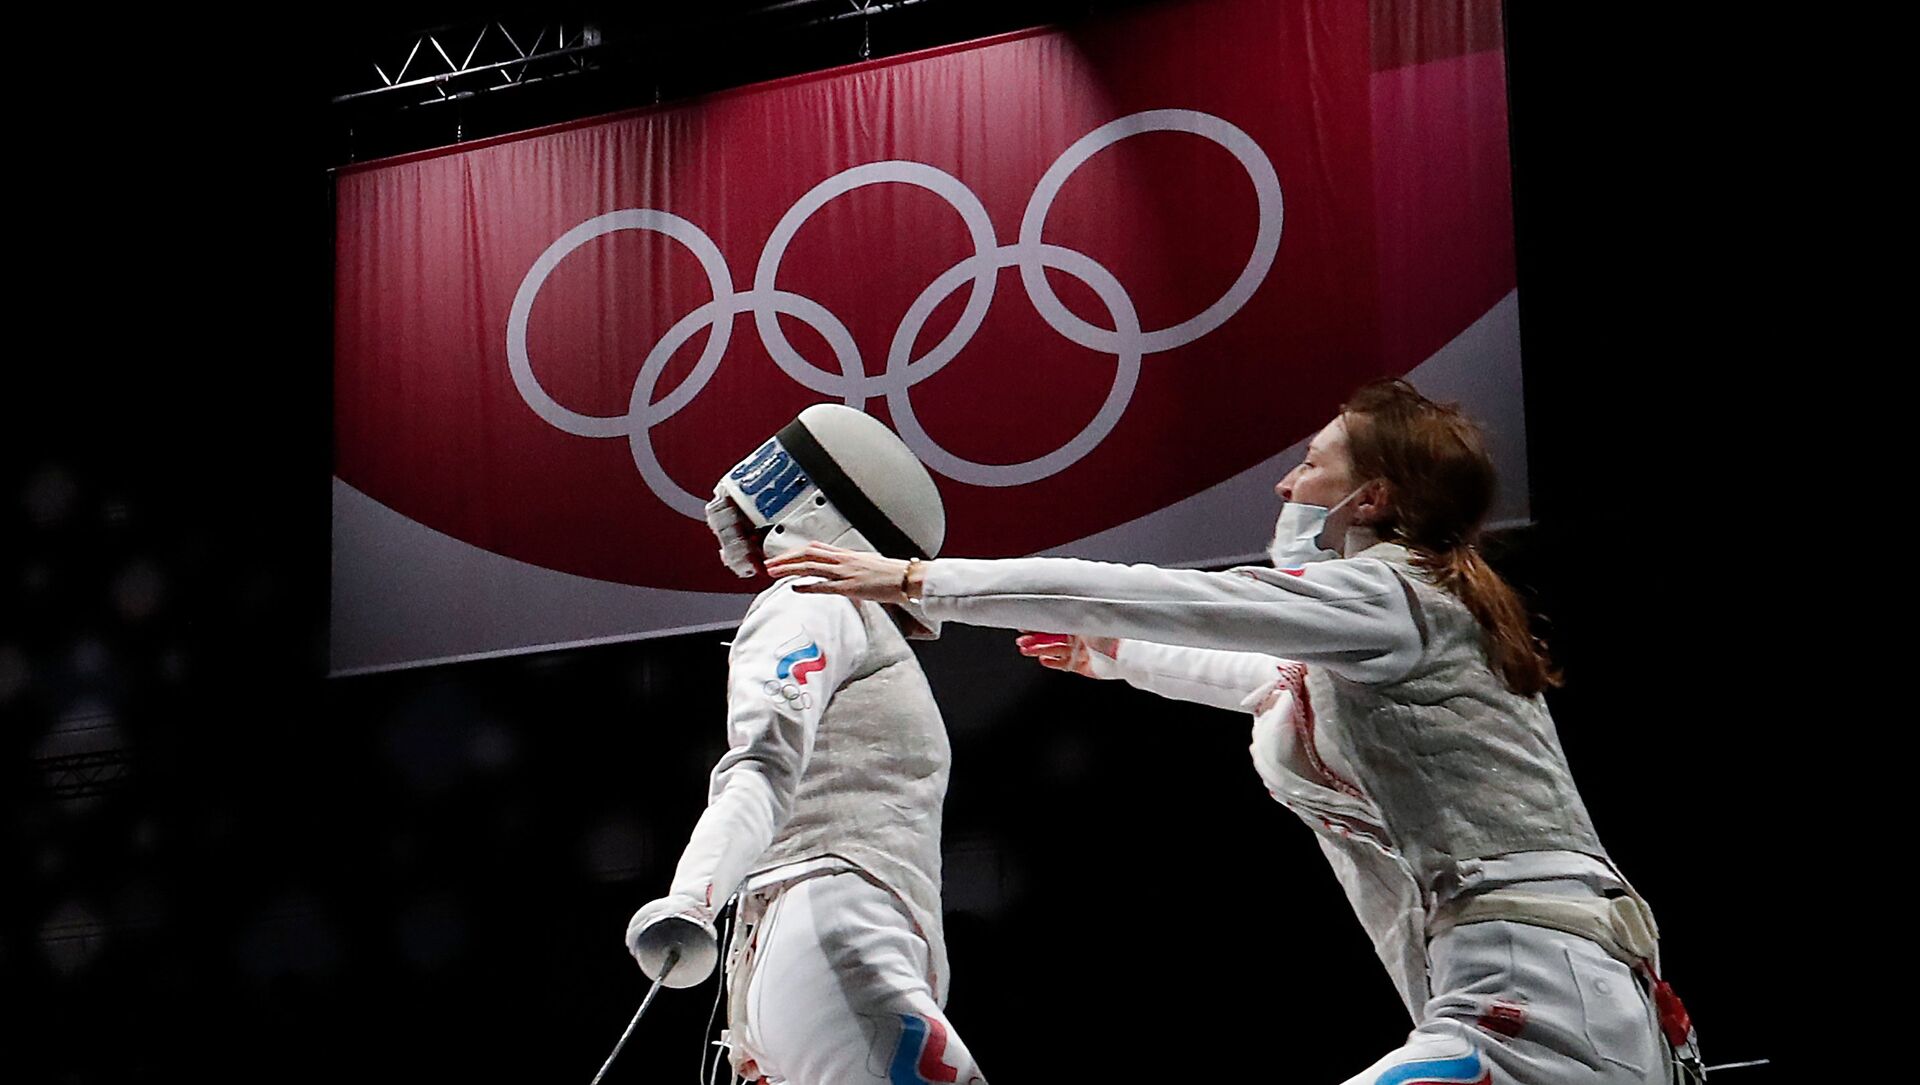 Germany canceled the Women's Foil World Cup due to the readmission of Russian and Belarusian athletes